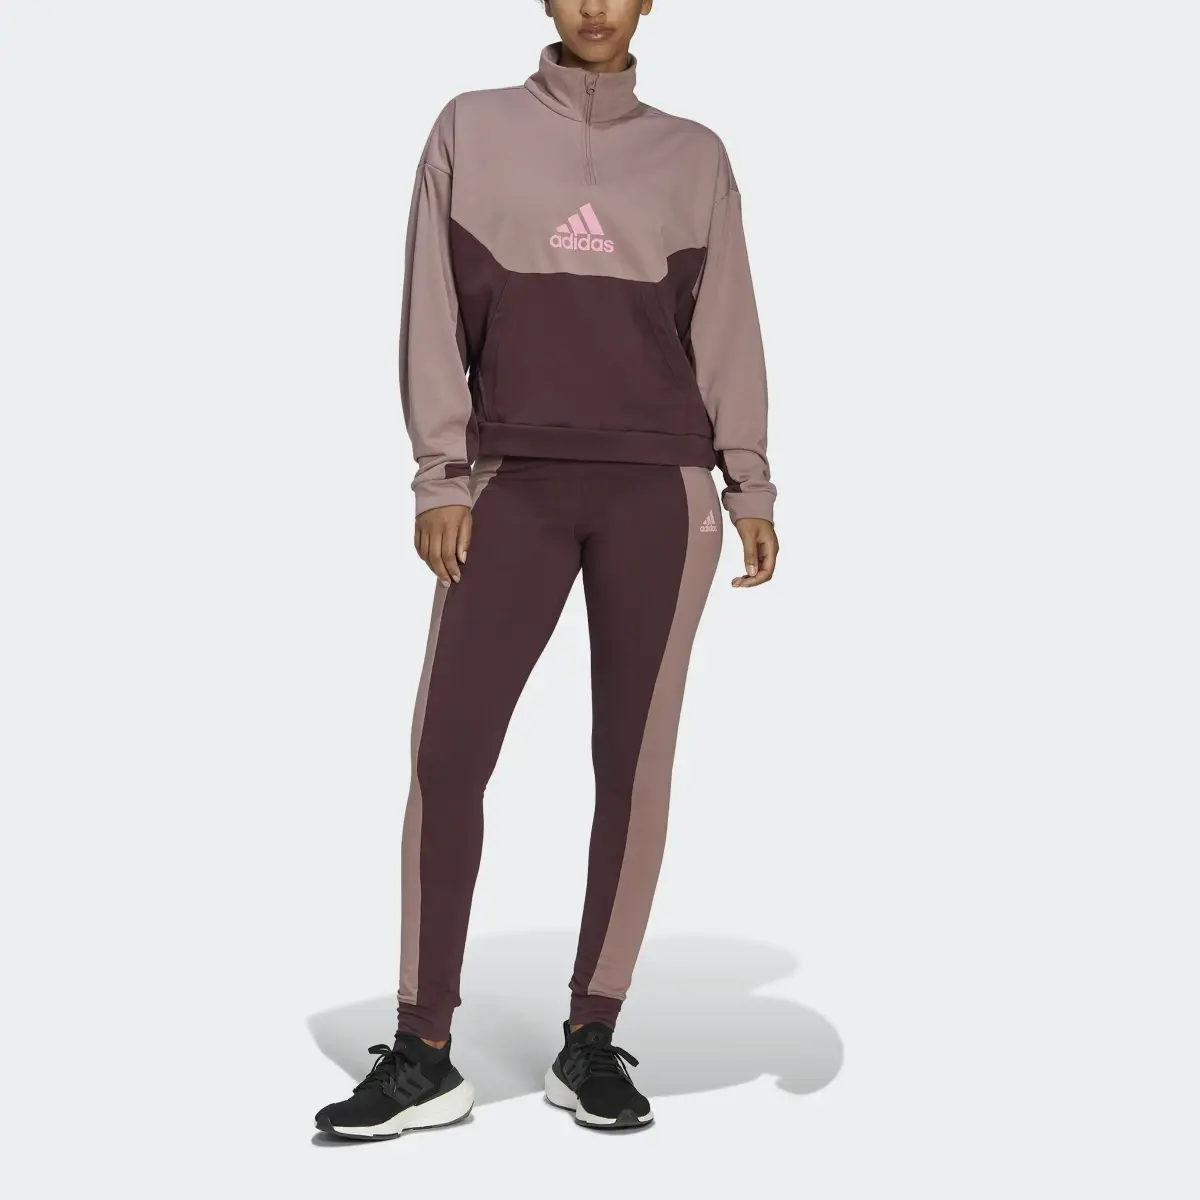 Adidas Half-Zip and Tights Tracksuit. 1